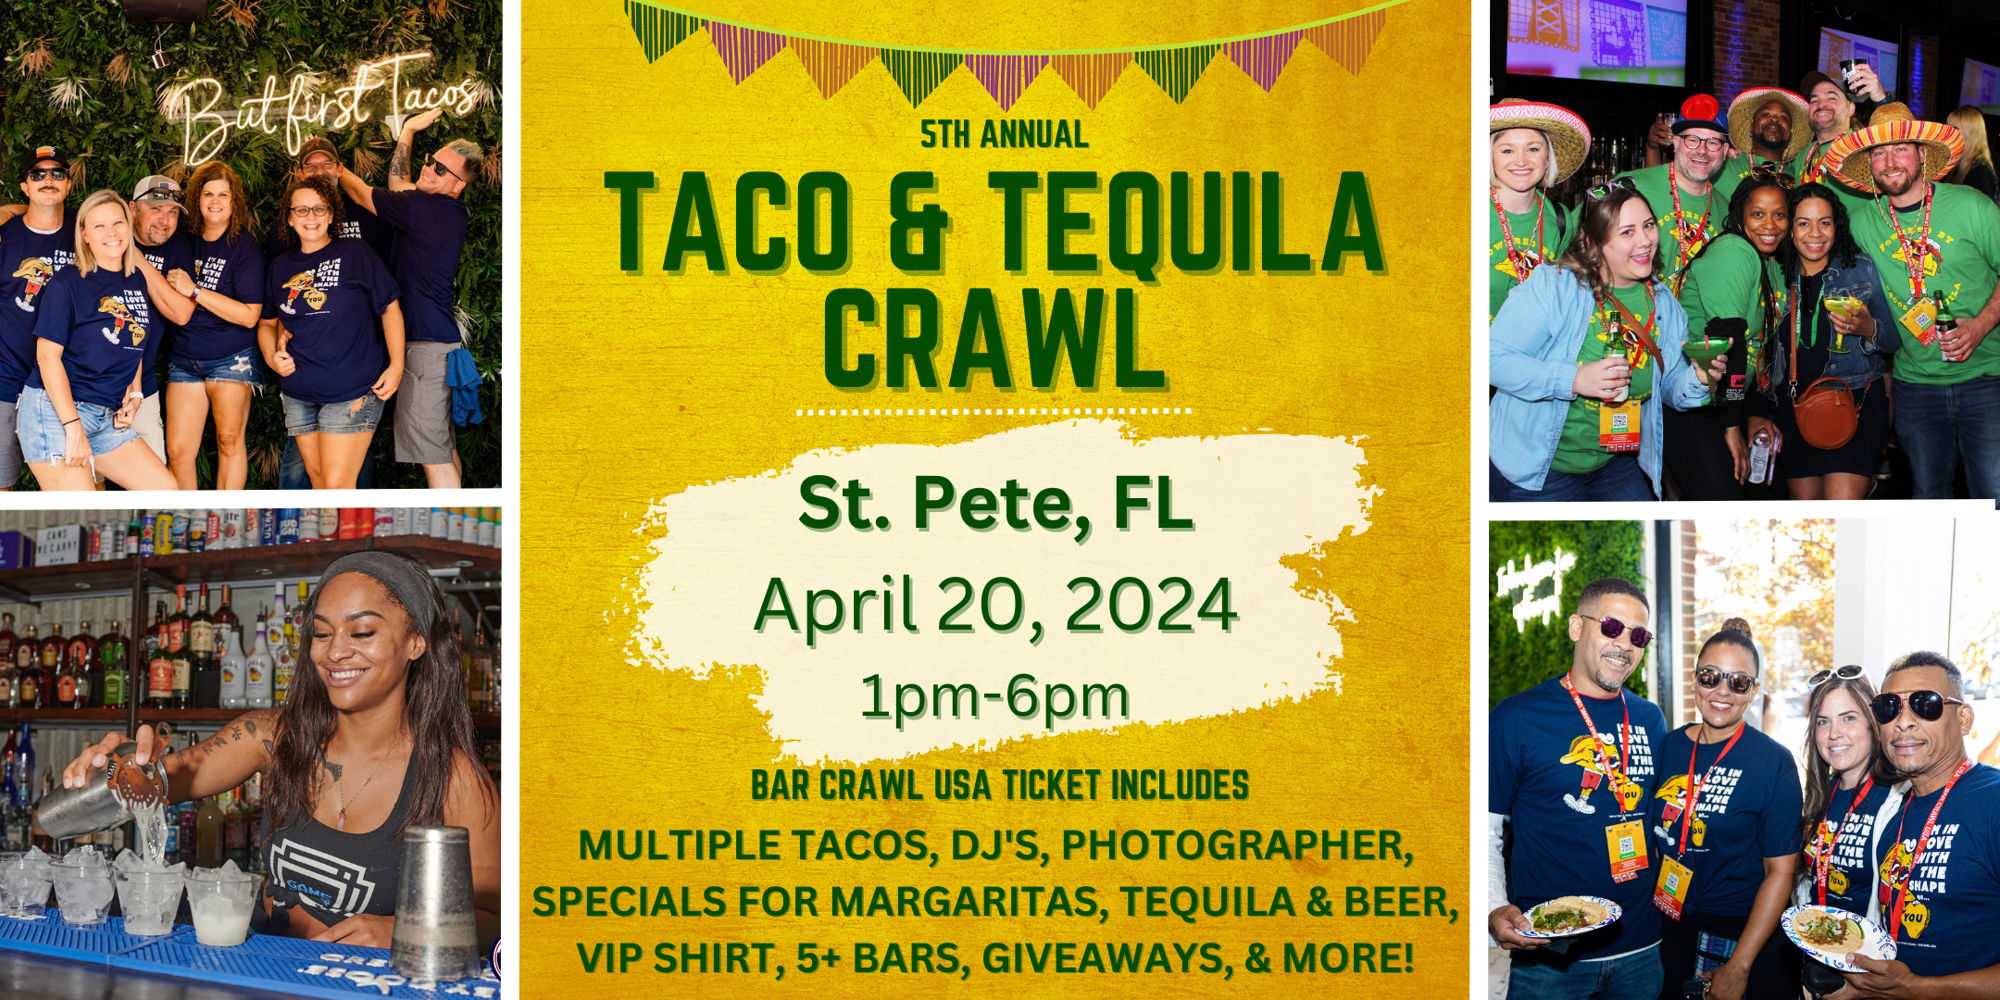 St. Pete Taco & Tequila Bar Crawl: 5th Annual promotional image